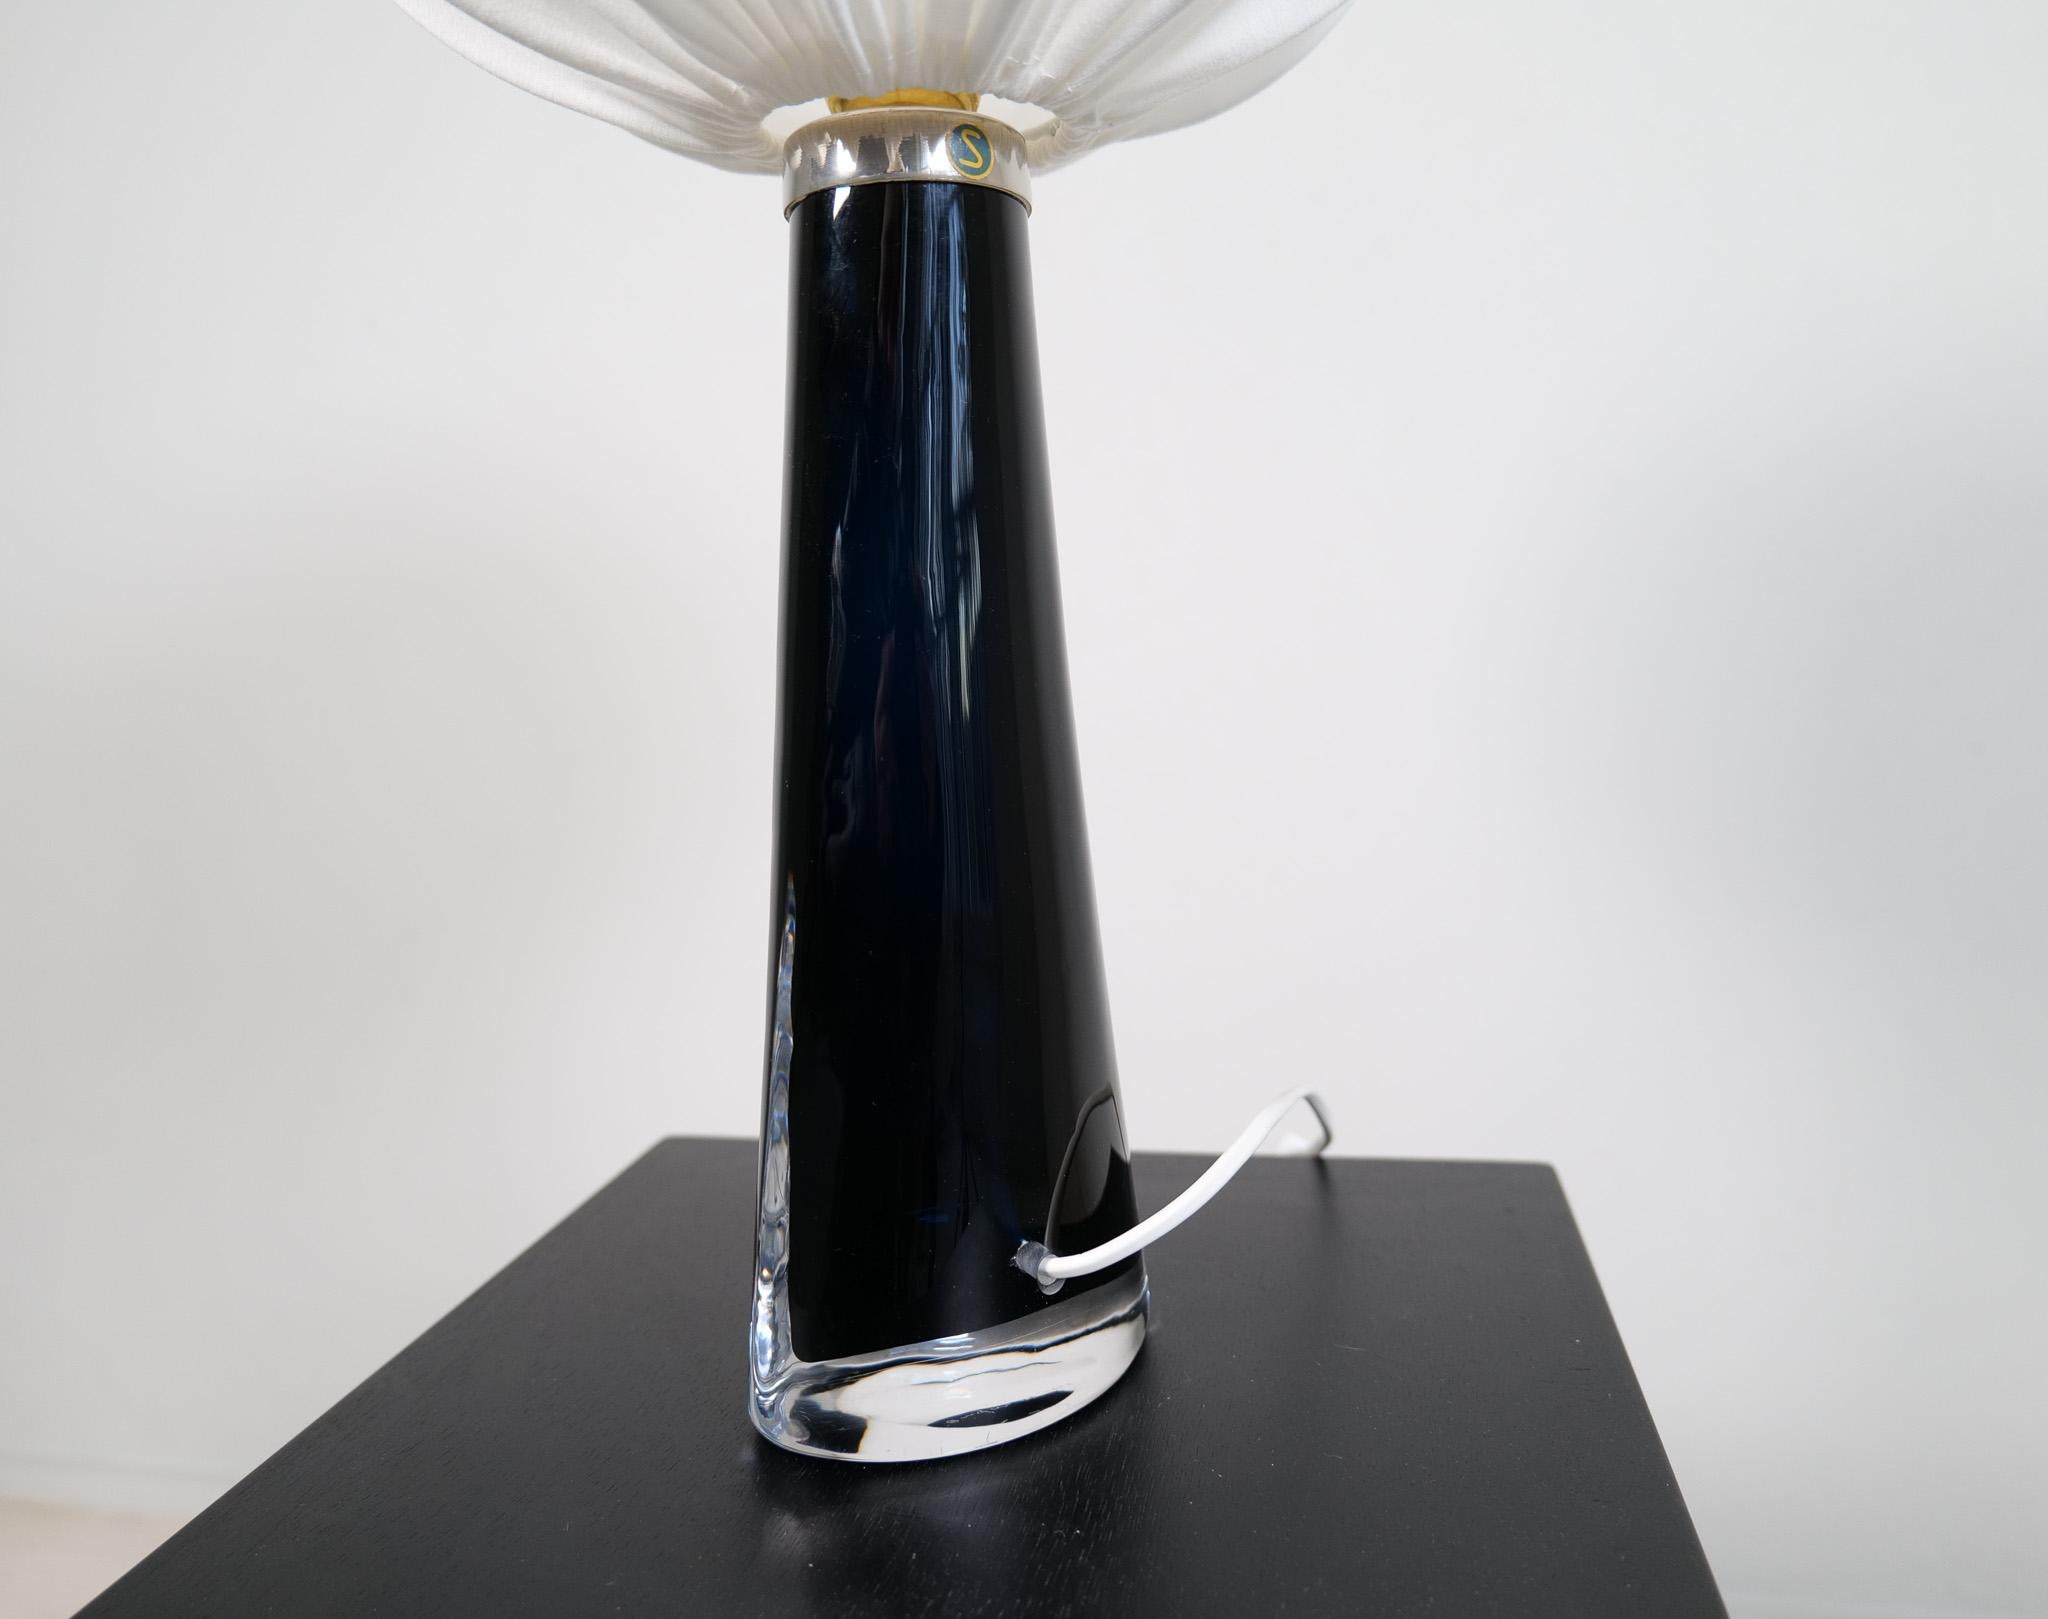 Midcentury Modern Sculptural Table Lamp by Carl Fagerlund Orrefors Sweden For Sale 3